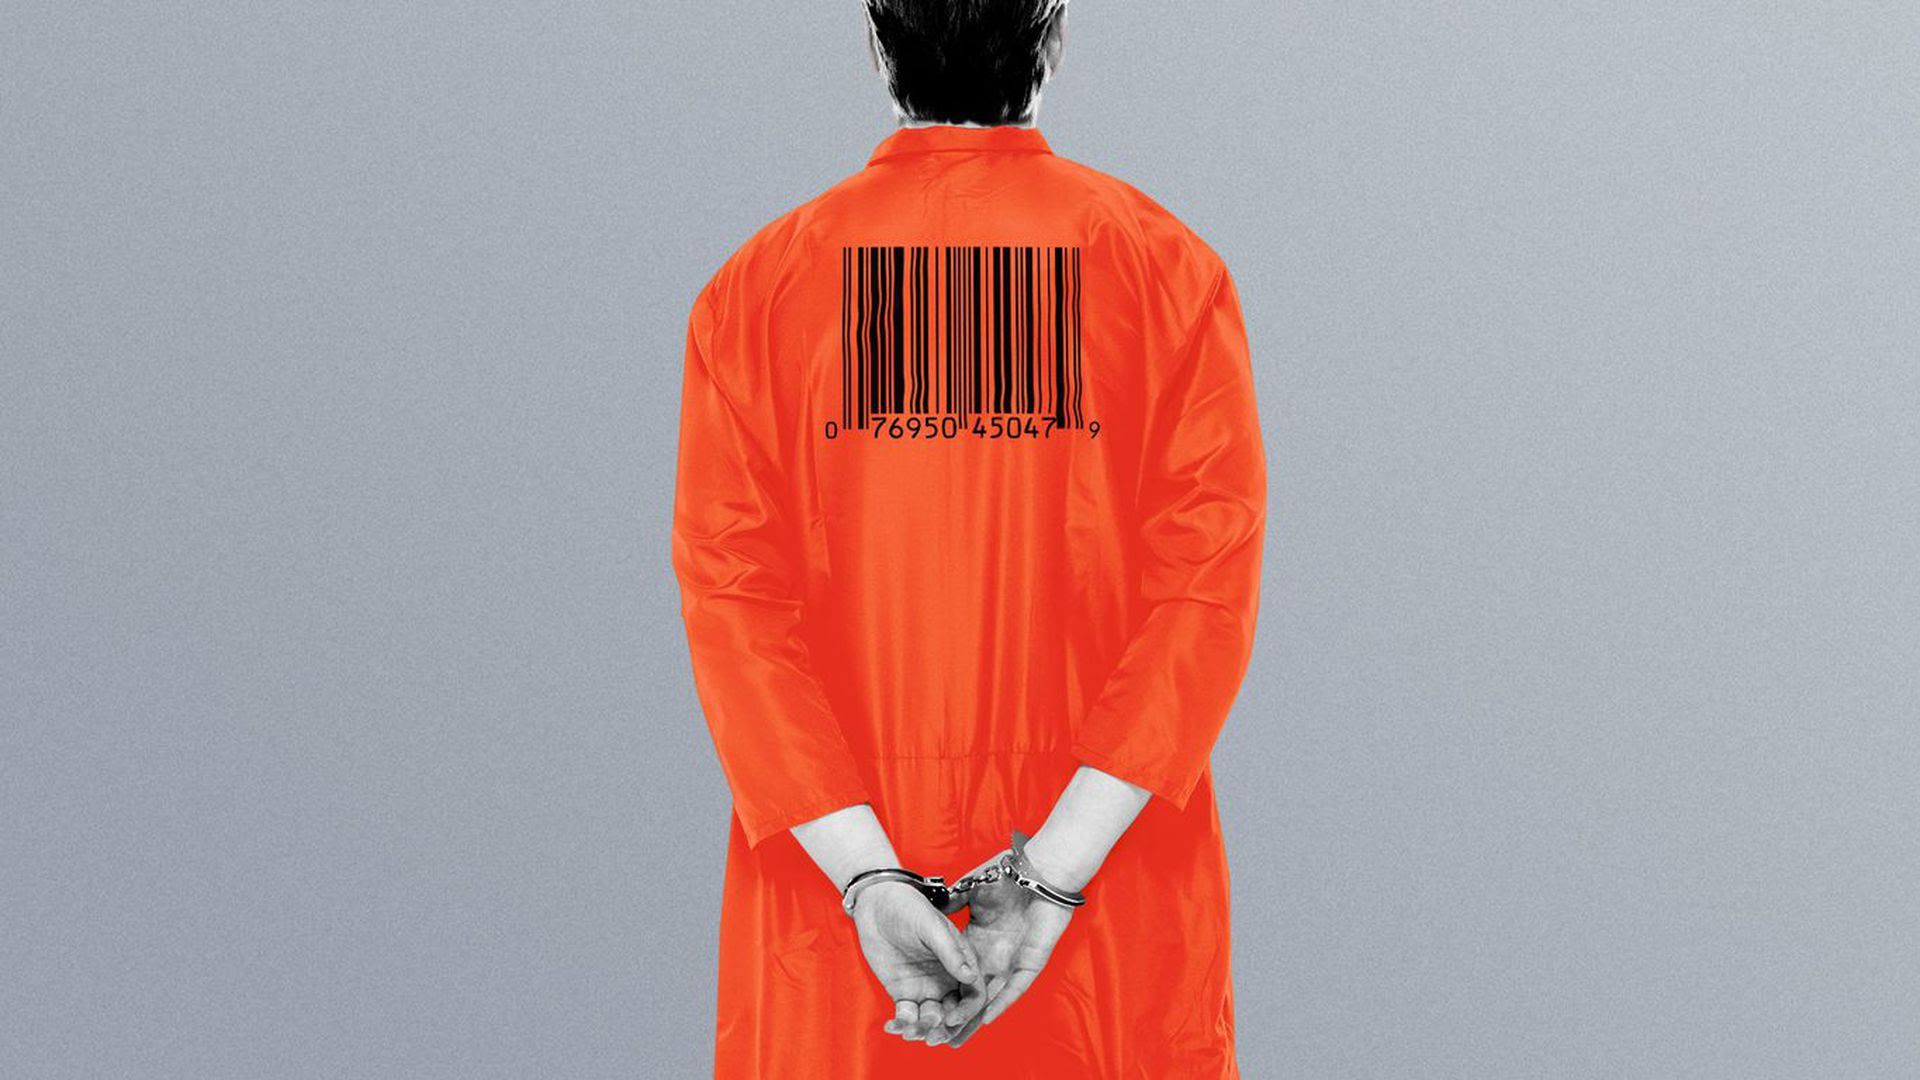 An illustration of a man with a barcode on his back.